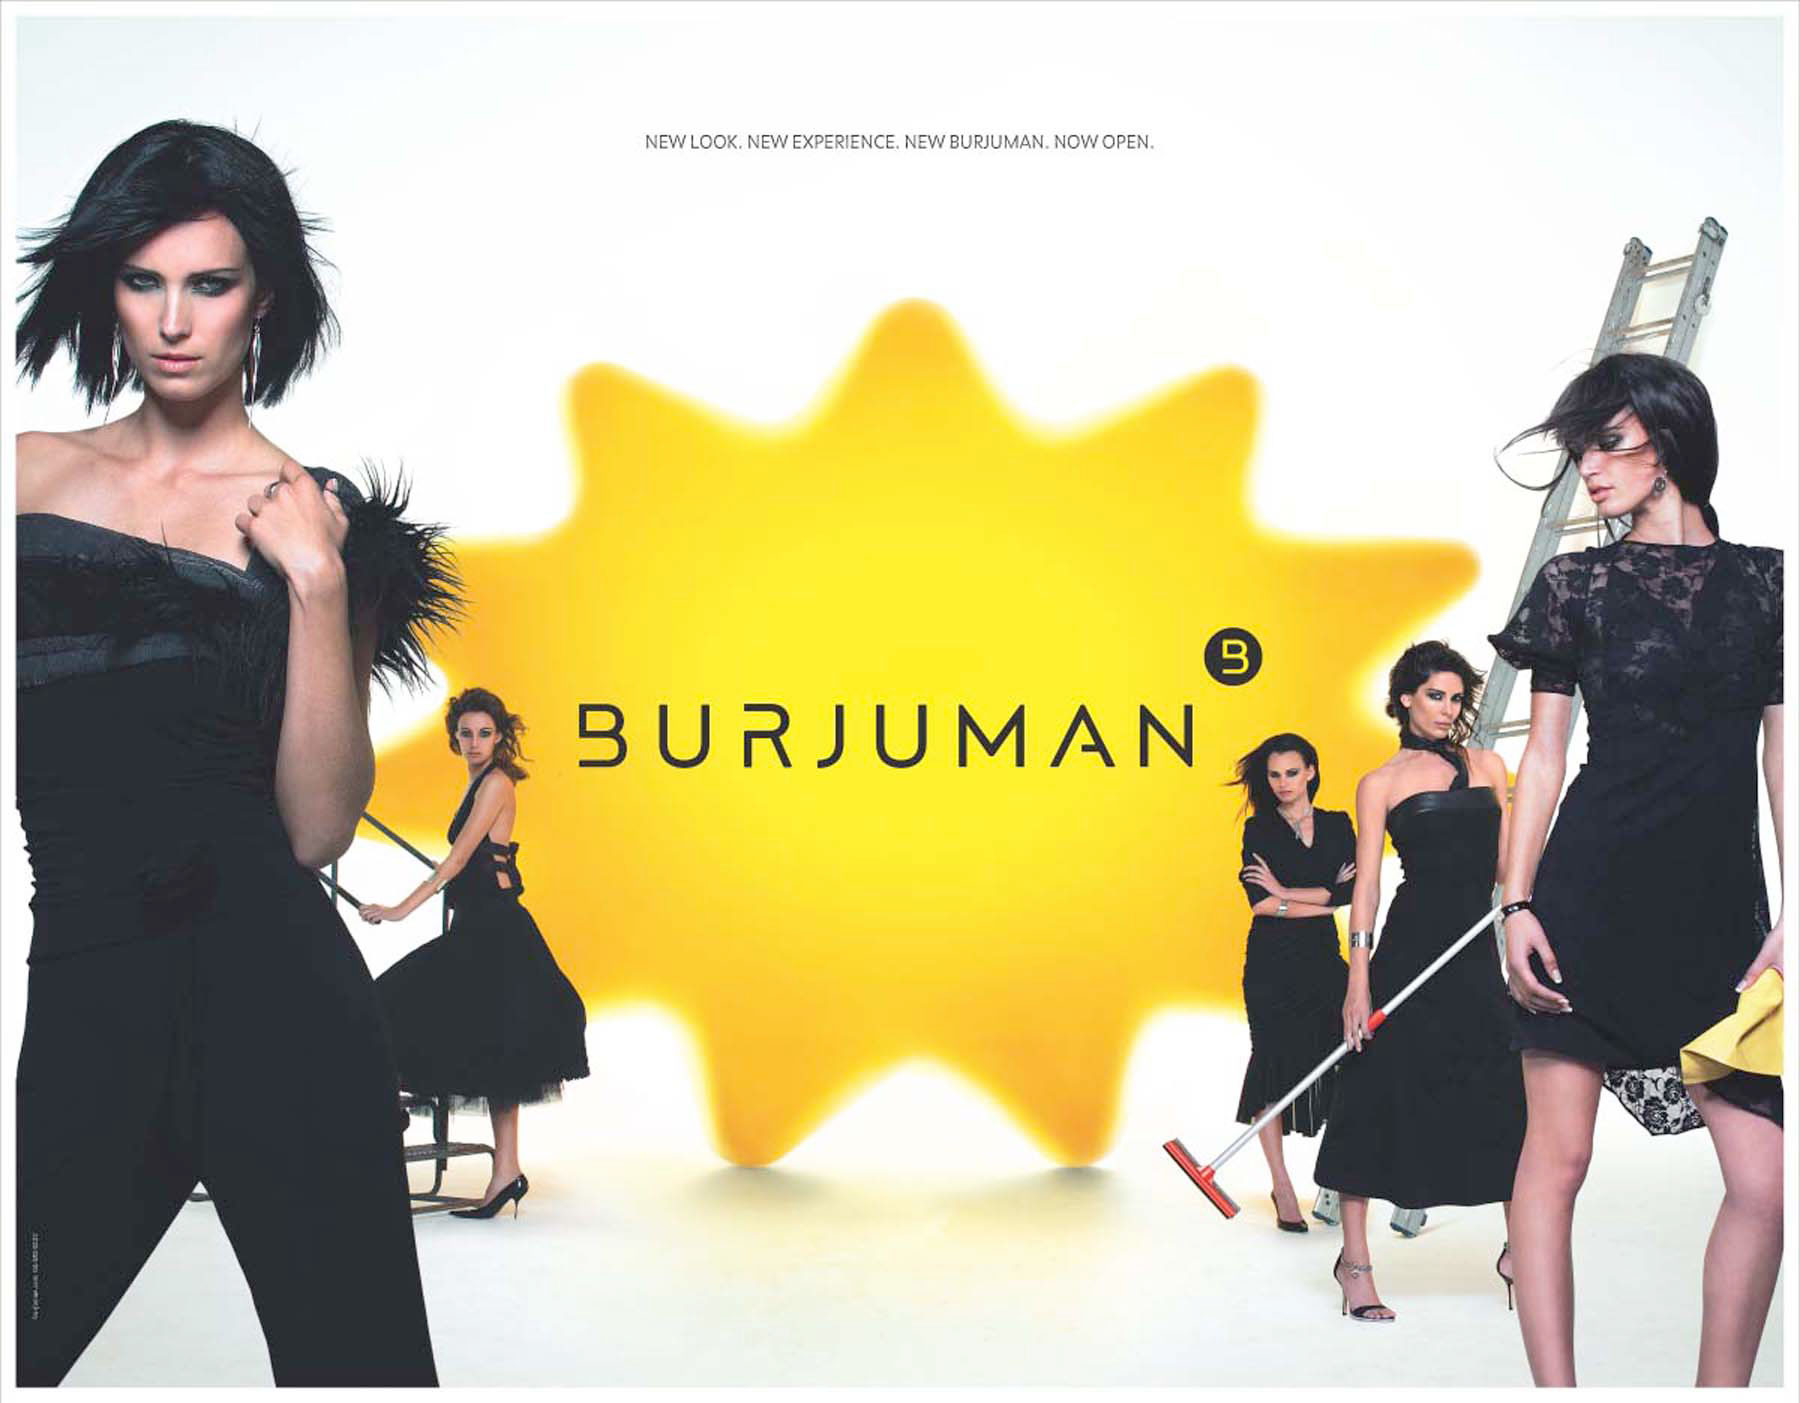 NEW-BurJuman-Kenny-Campaign-Launch-Ad-Reveal-DPS-Open.jpg